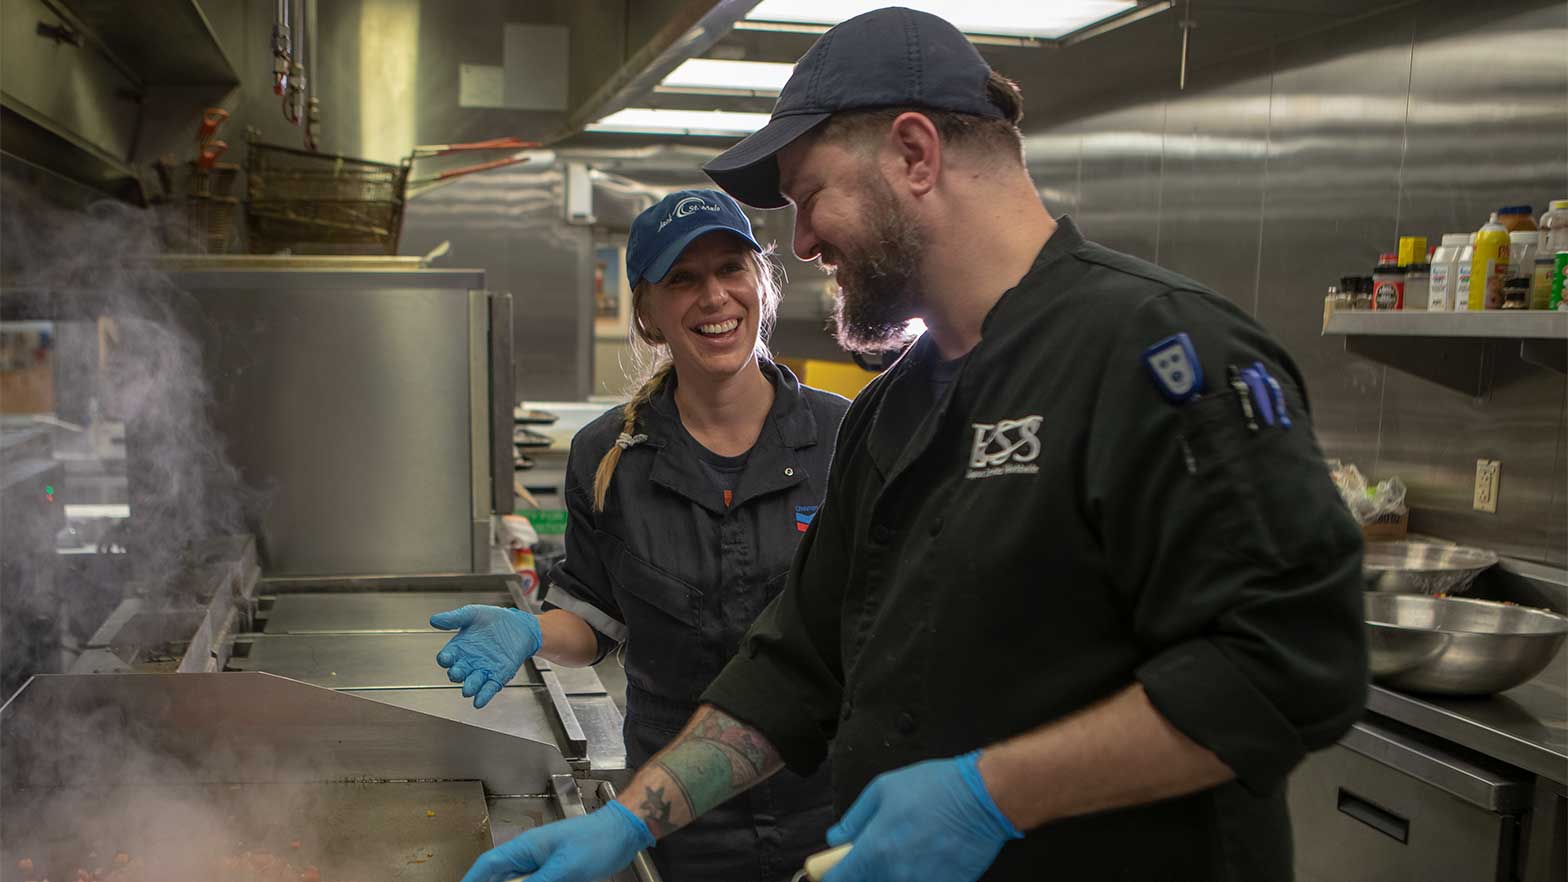 two chefs prepare meals over the kitchen stove